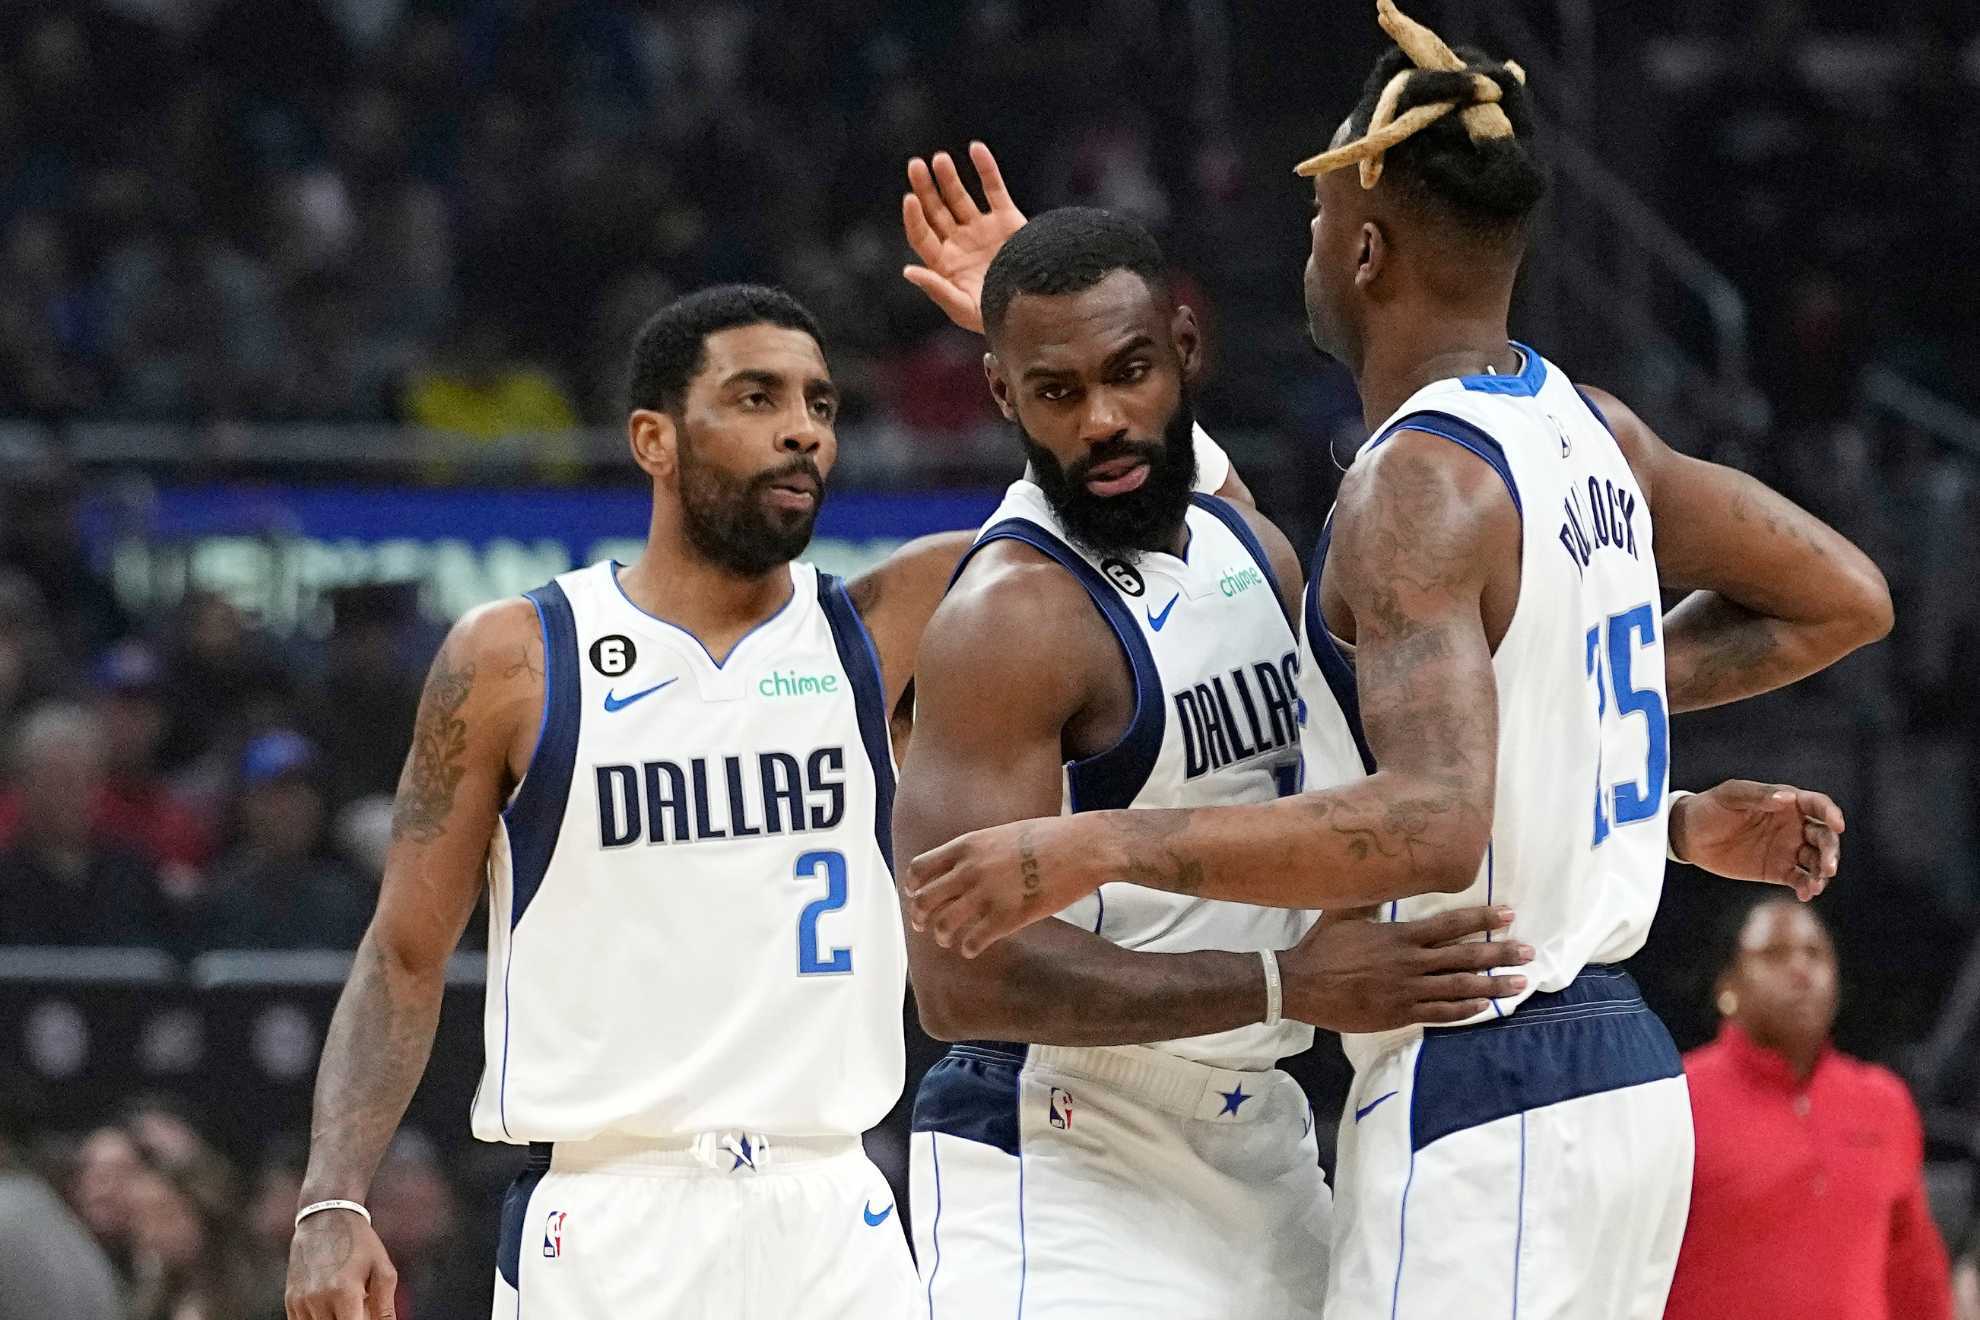 Kyrie Irving, left, celebrates with teammates forward Tim Hardaway Jr., center, and forward Reggie Bullock during the Mavs win over the Clippers.